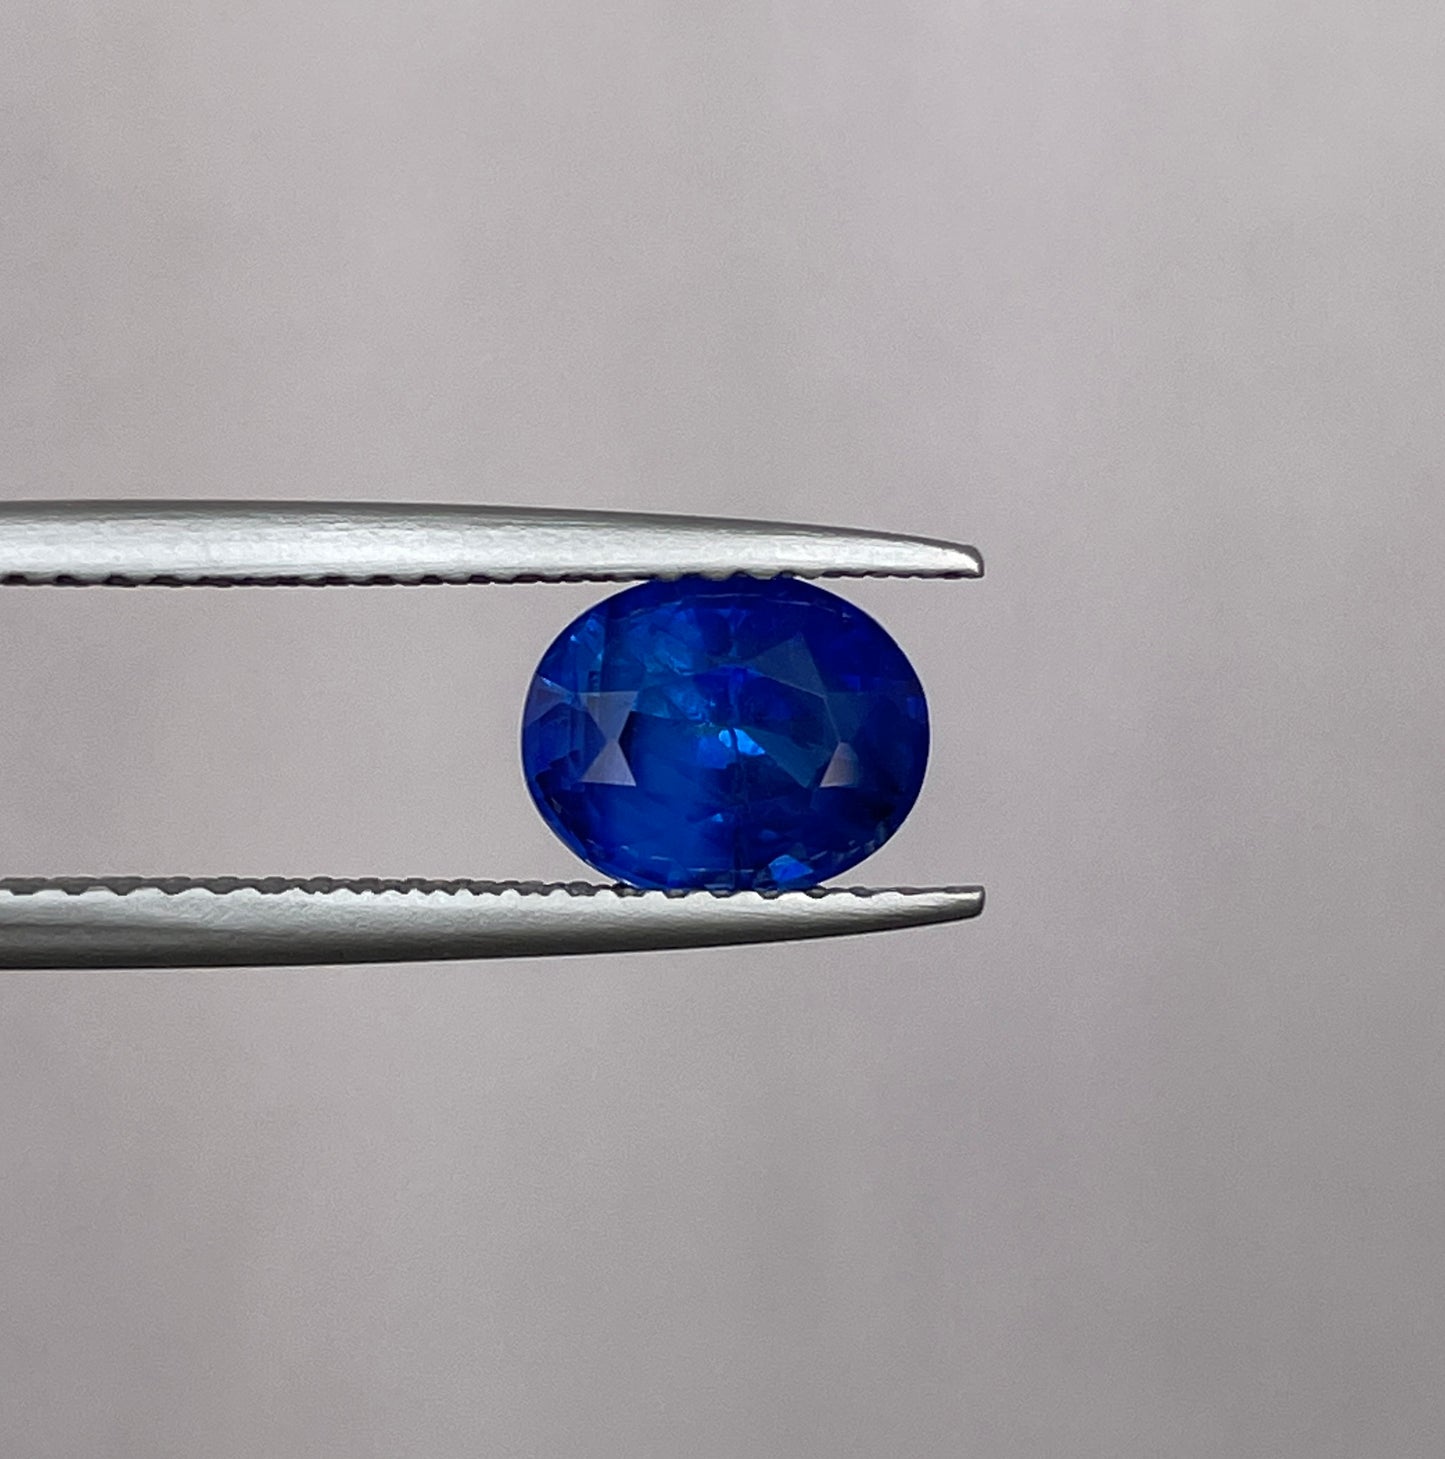 Sri Lanka Blue Sapphire, 1.67 ct, Genuine Blue Sapphire Loose Stone, Low Cost Gem for Wedding Rings, Faceted Sapphire, September Birthstone